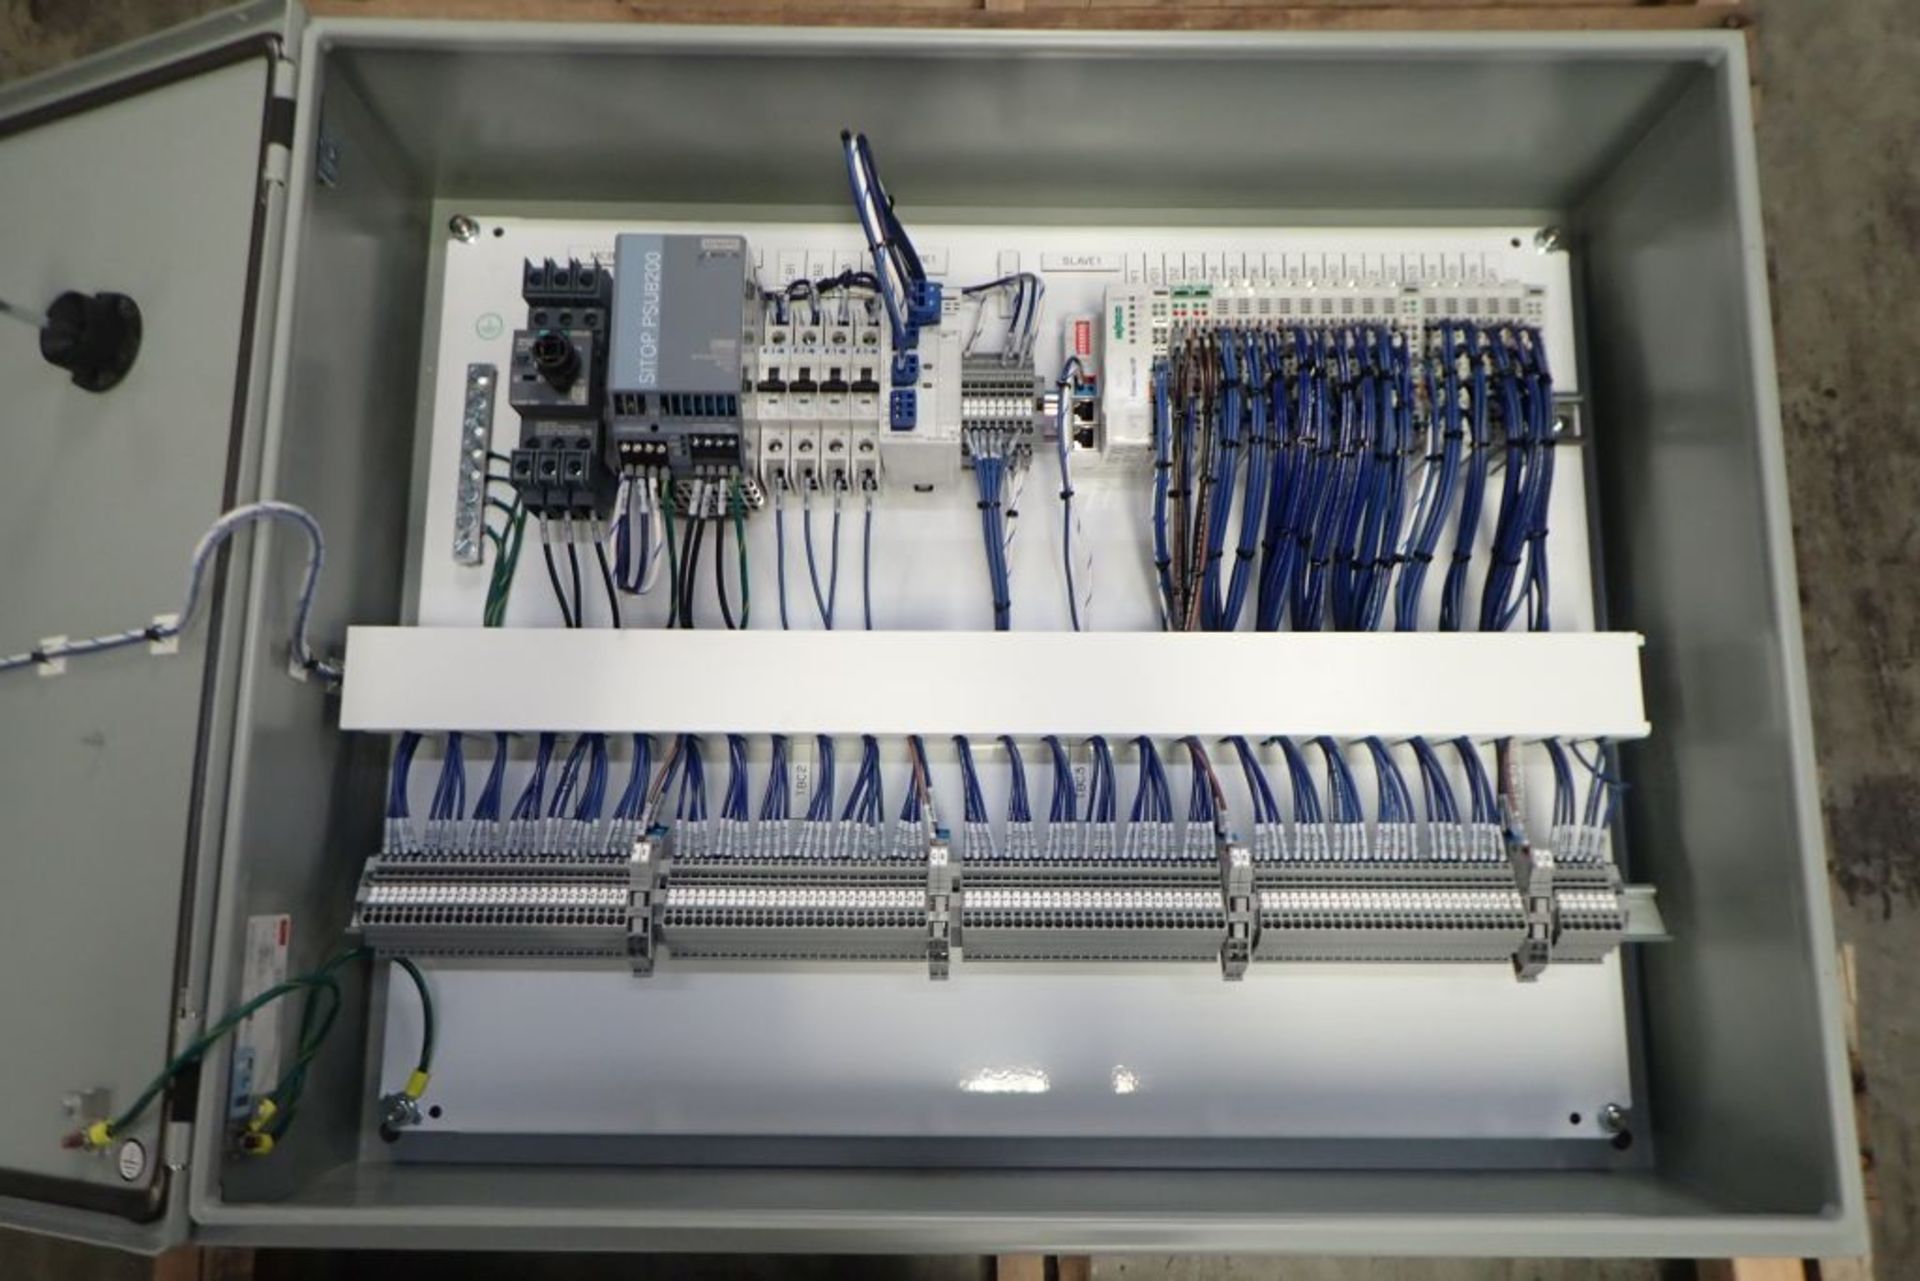 Hoffman Nvent Industrial Control Panel Enclosure with Contents - Image 4 of 6